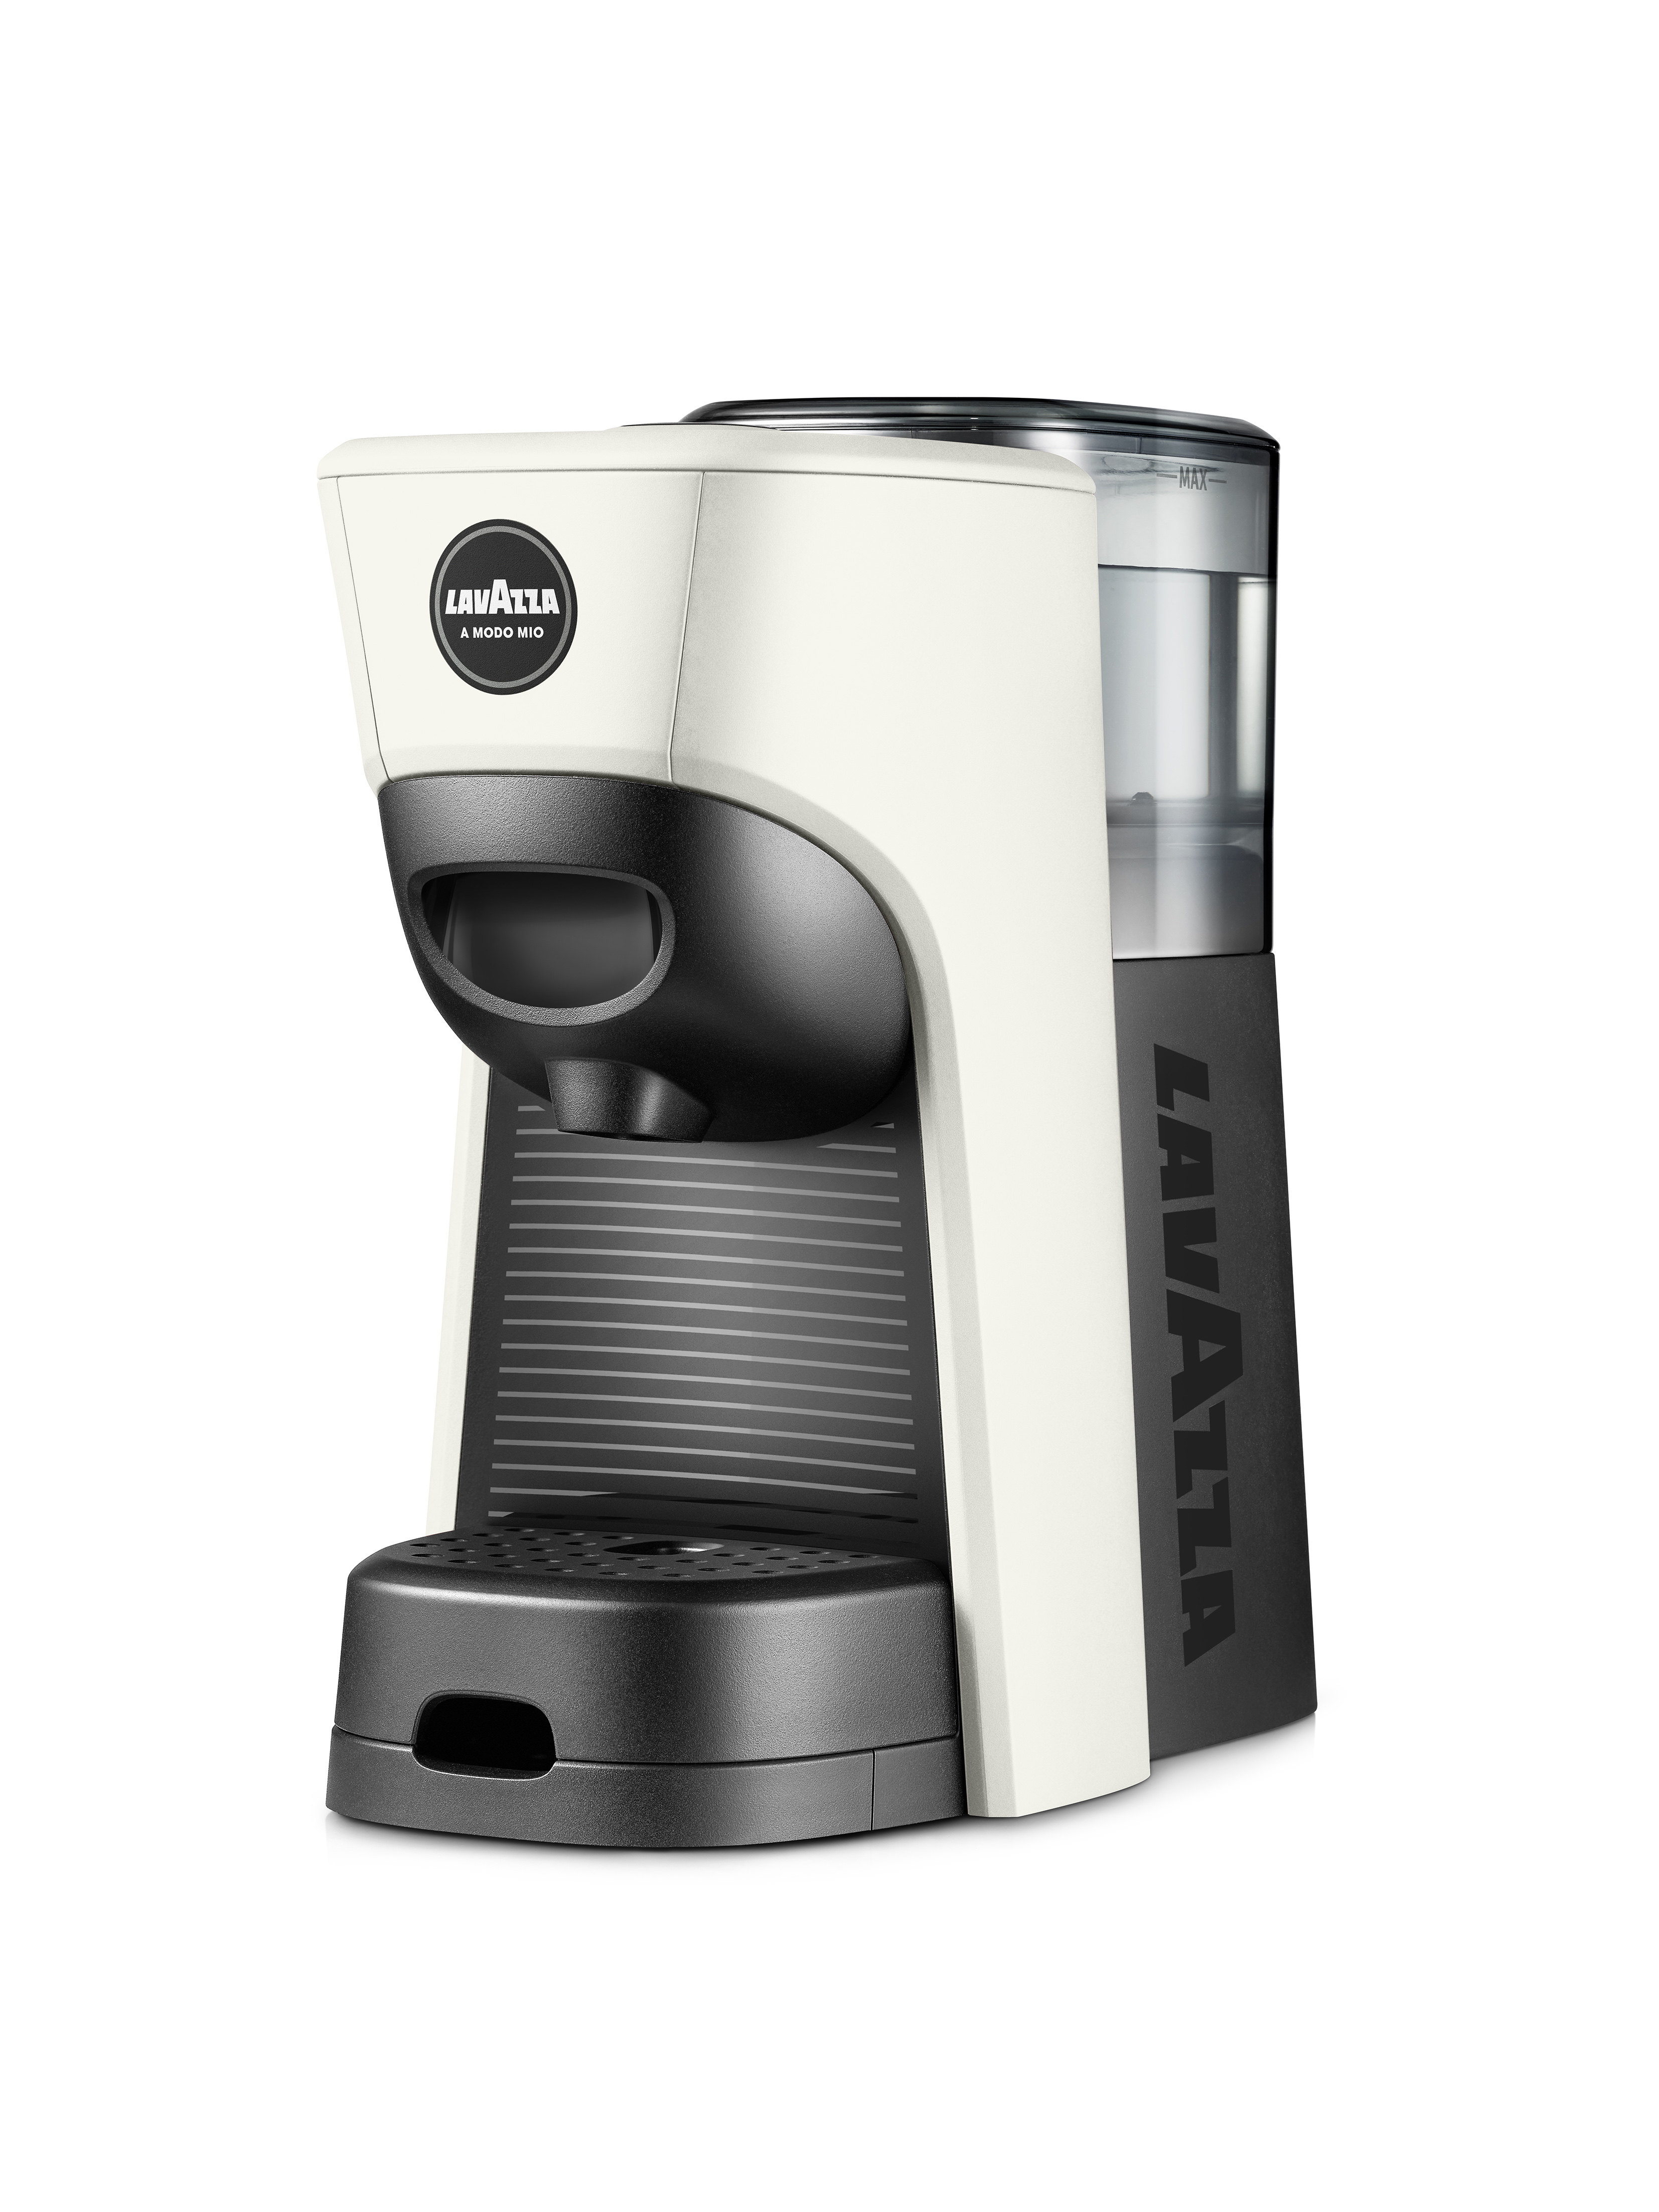 and Lavazza launches first ever coffee machine with built